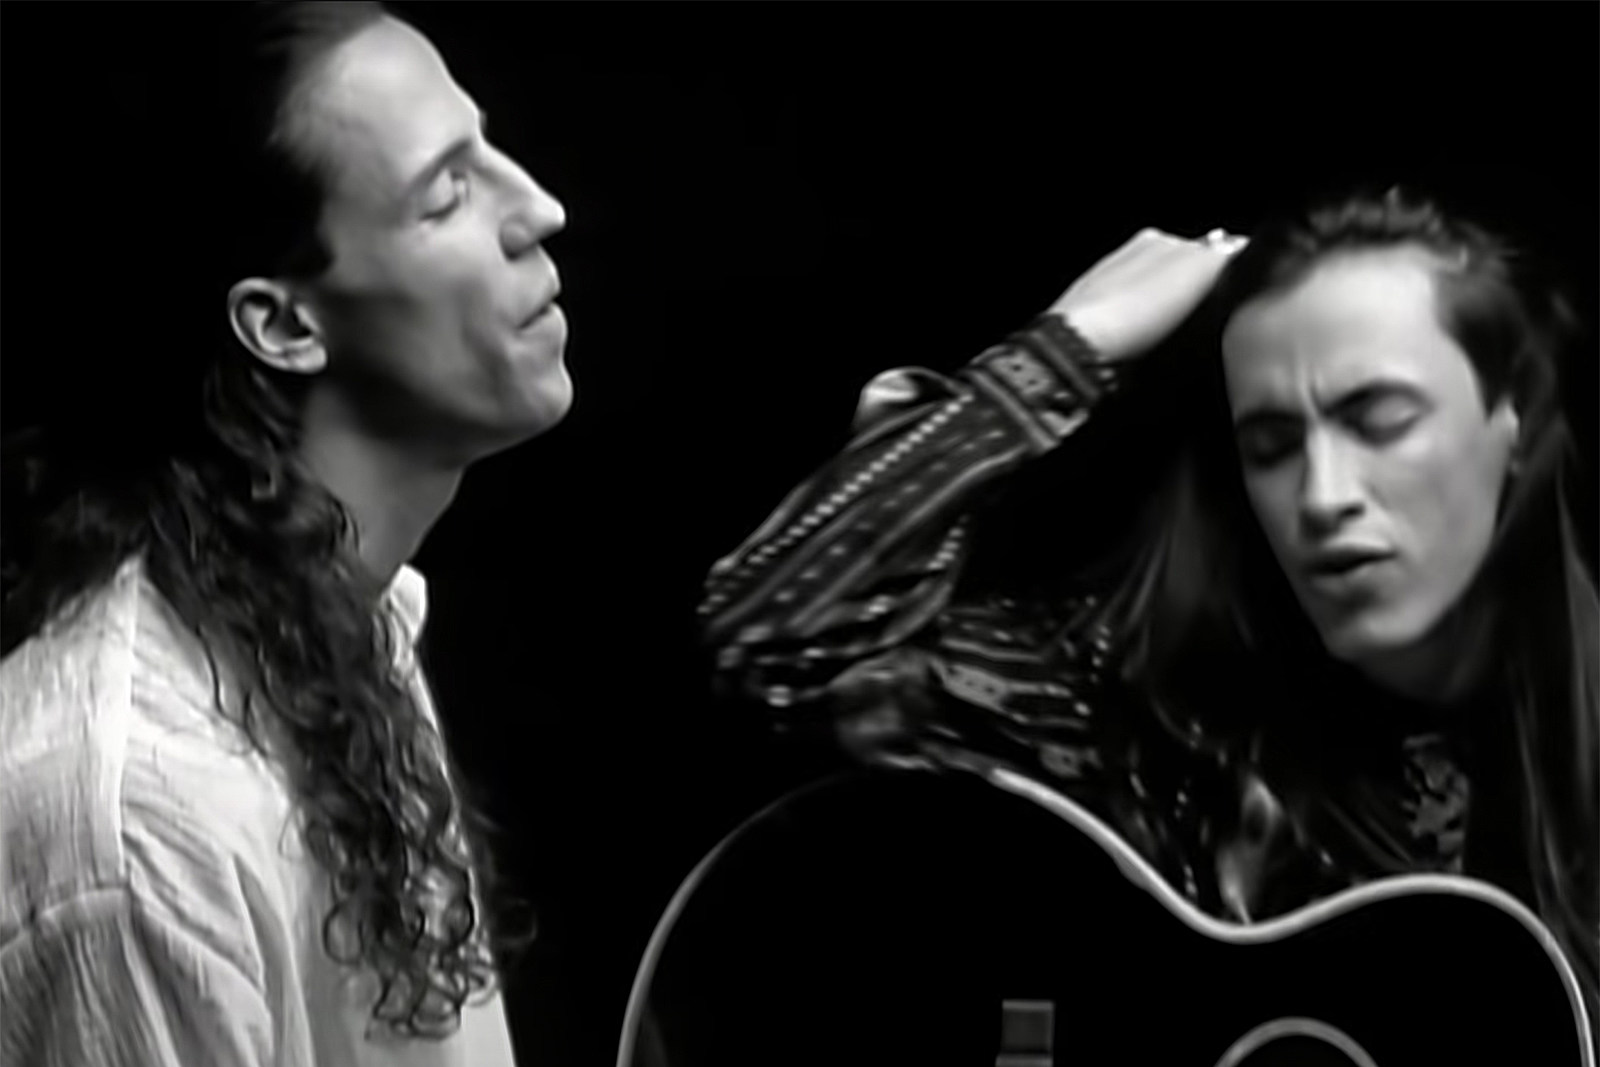 Watch Extreme's Nuno Bettencourt perform Rise guitar solo live for the  first time